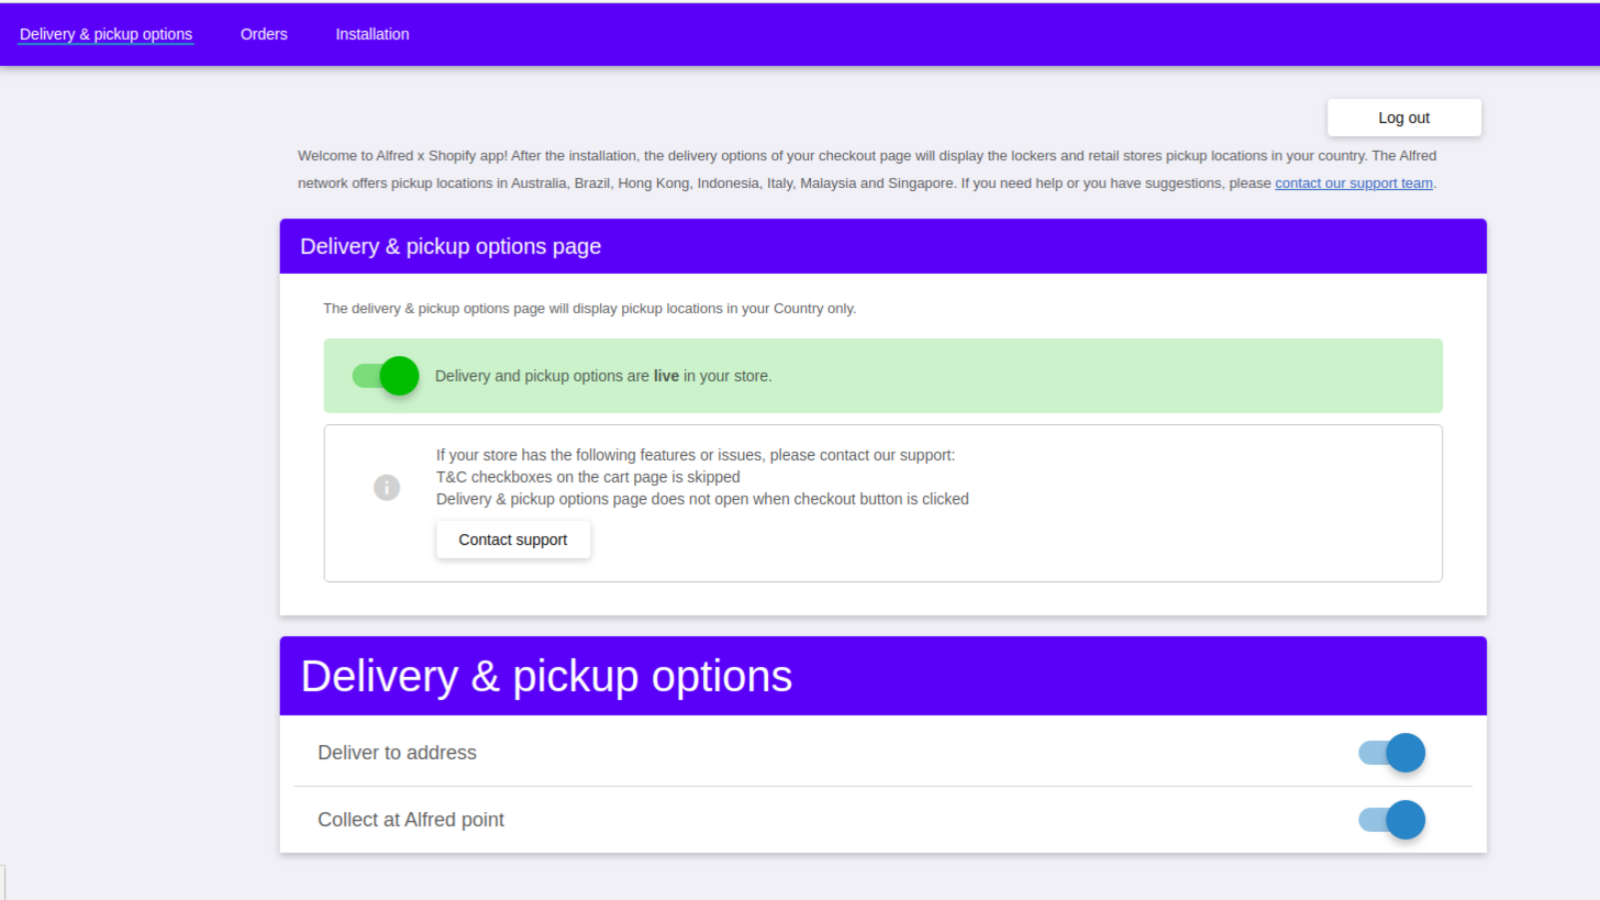 Delivery and pickup options